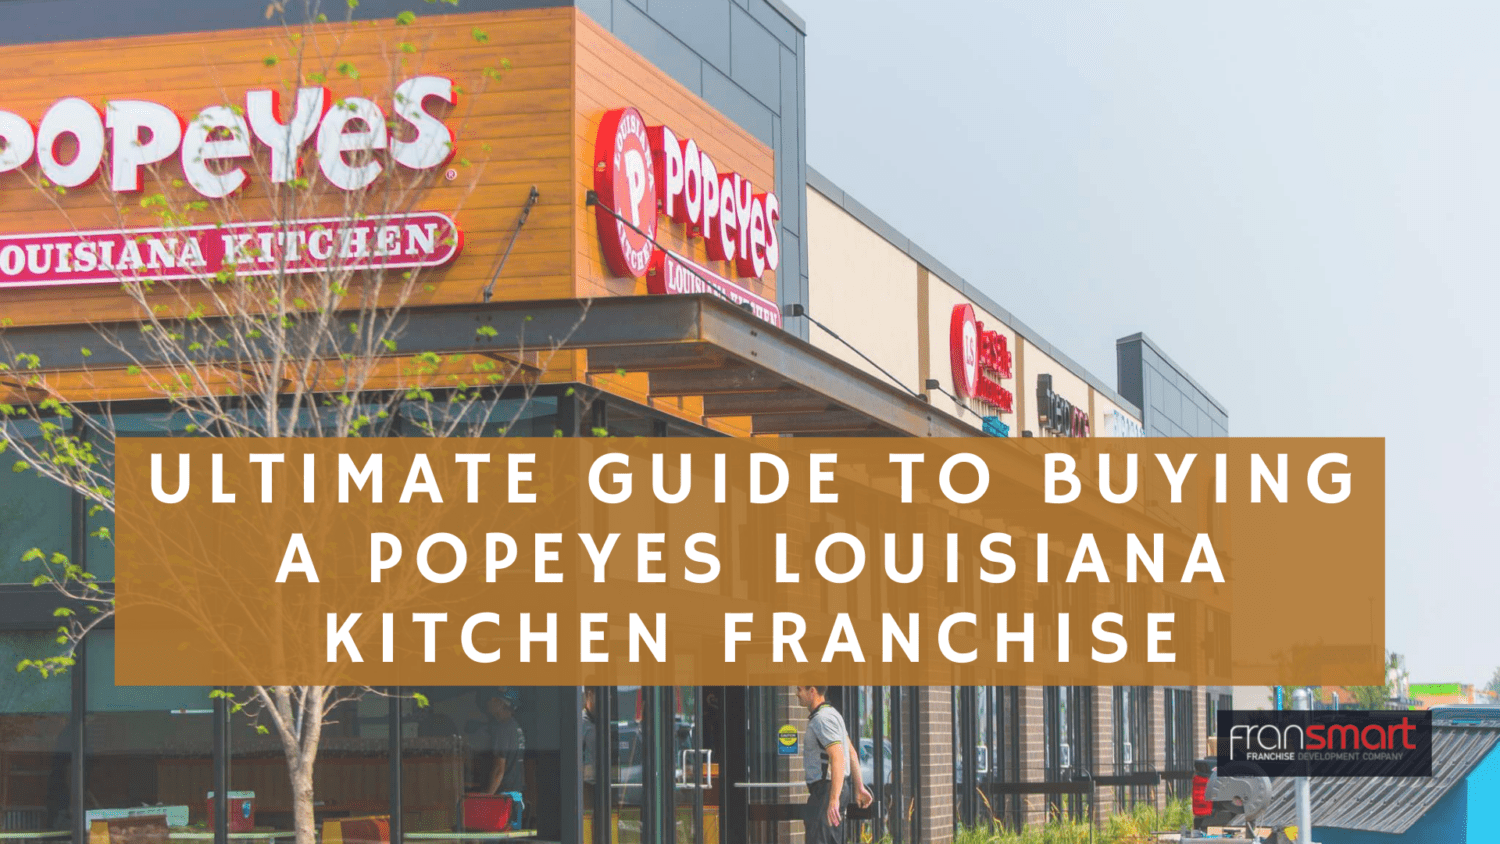 Ultimate Guide to Buying a Popeyes Louisiana Kitchen Franchise